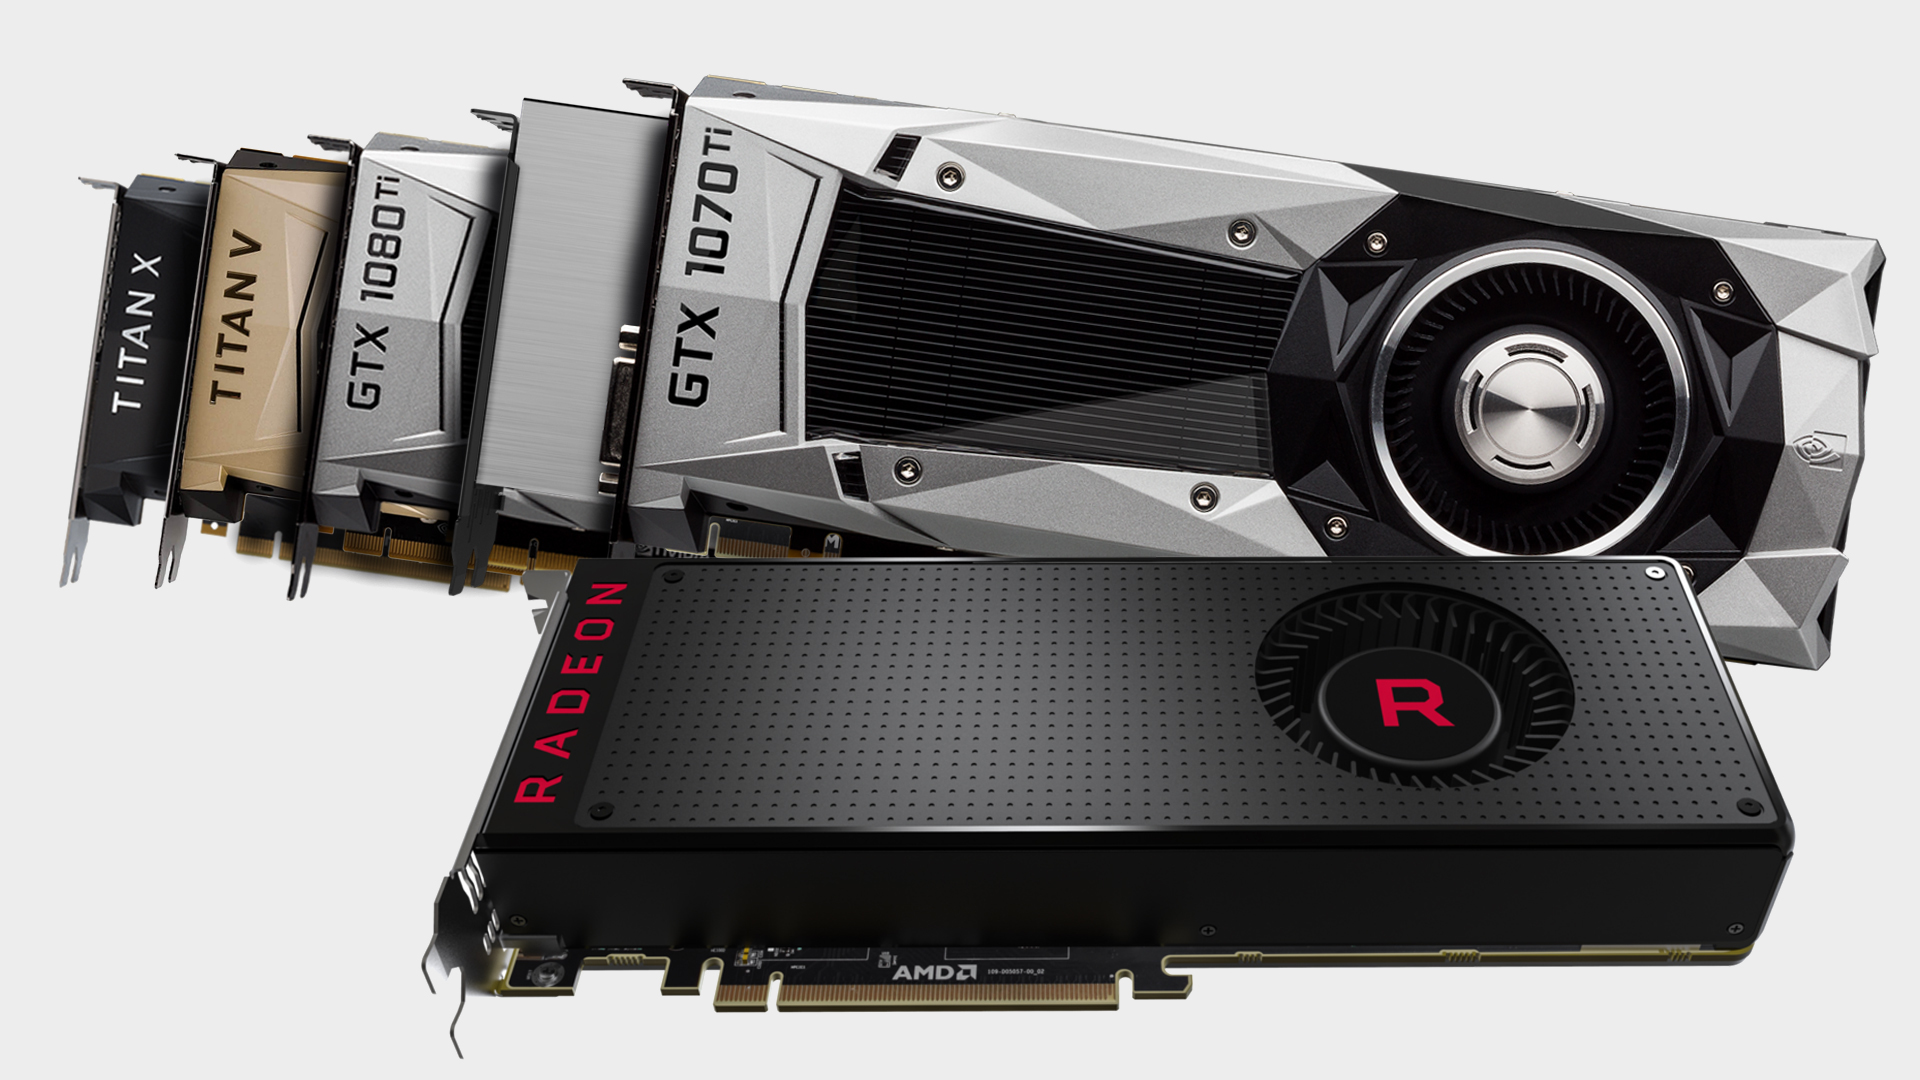  Cheap graphics card deals in the UK 